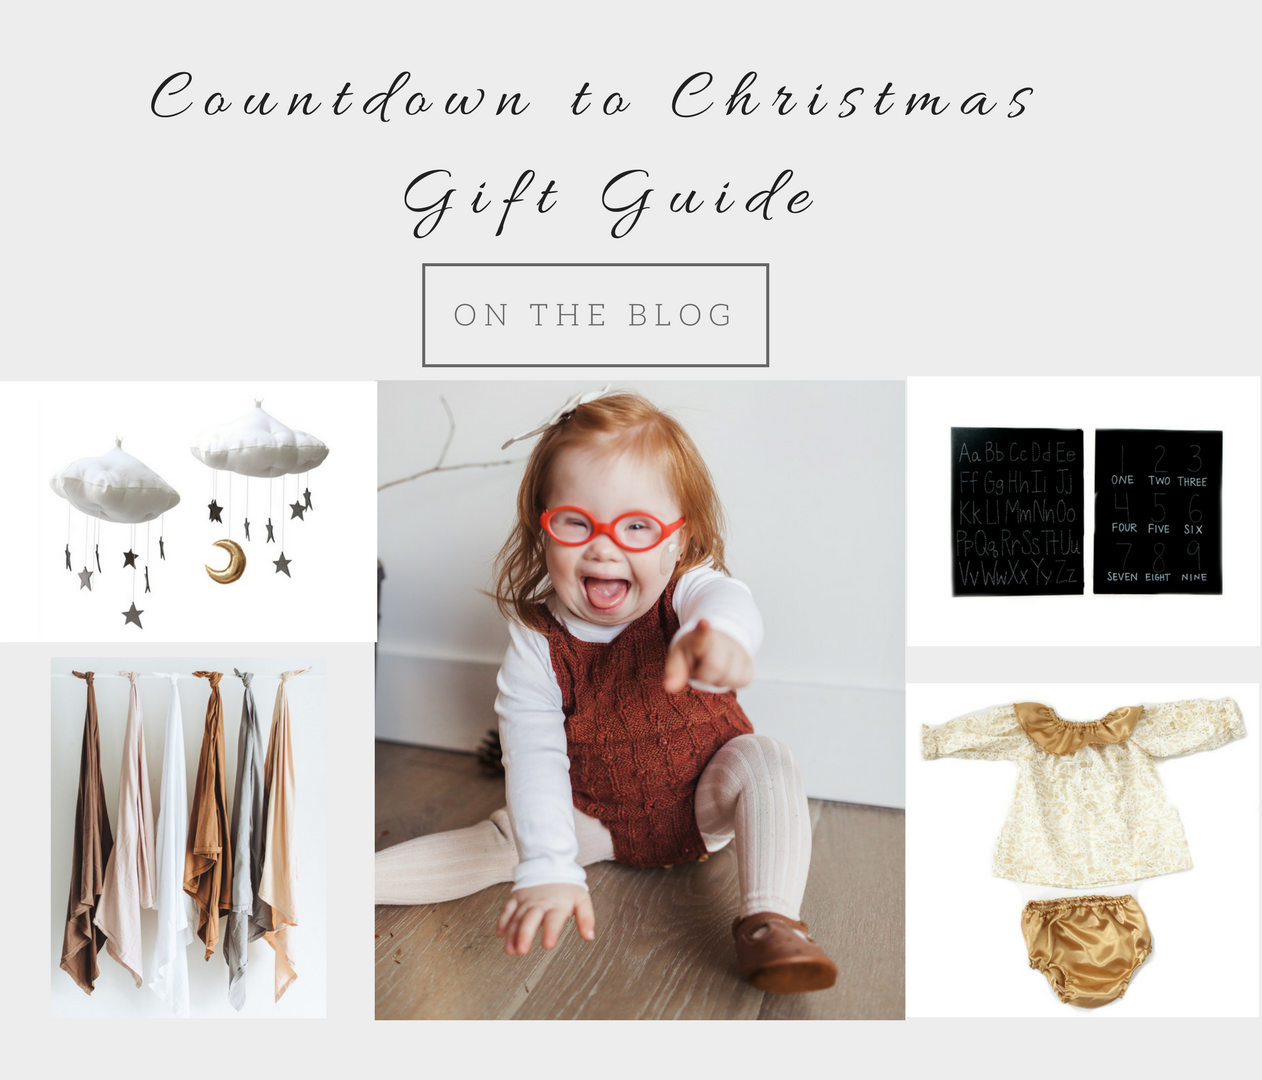 Countdown to Christmas Gift Guide!